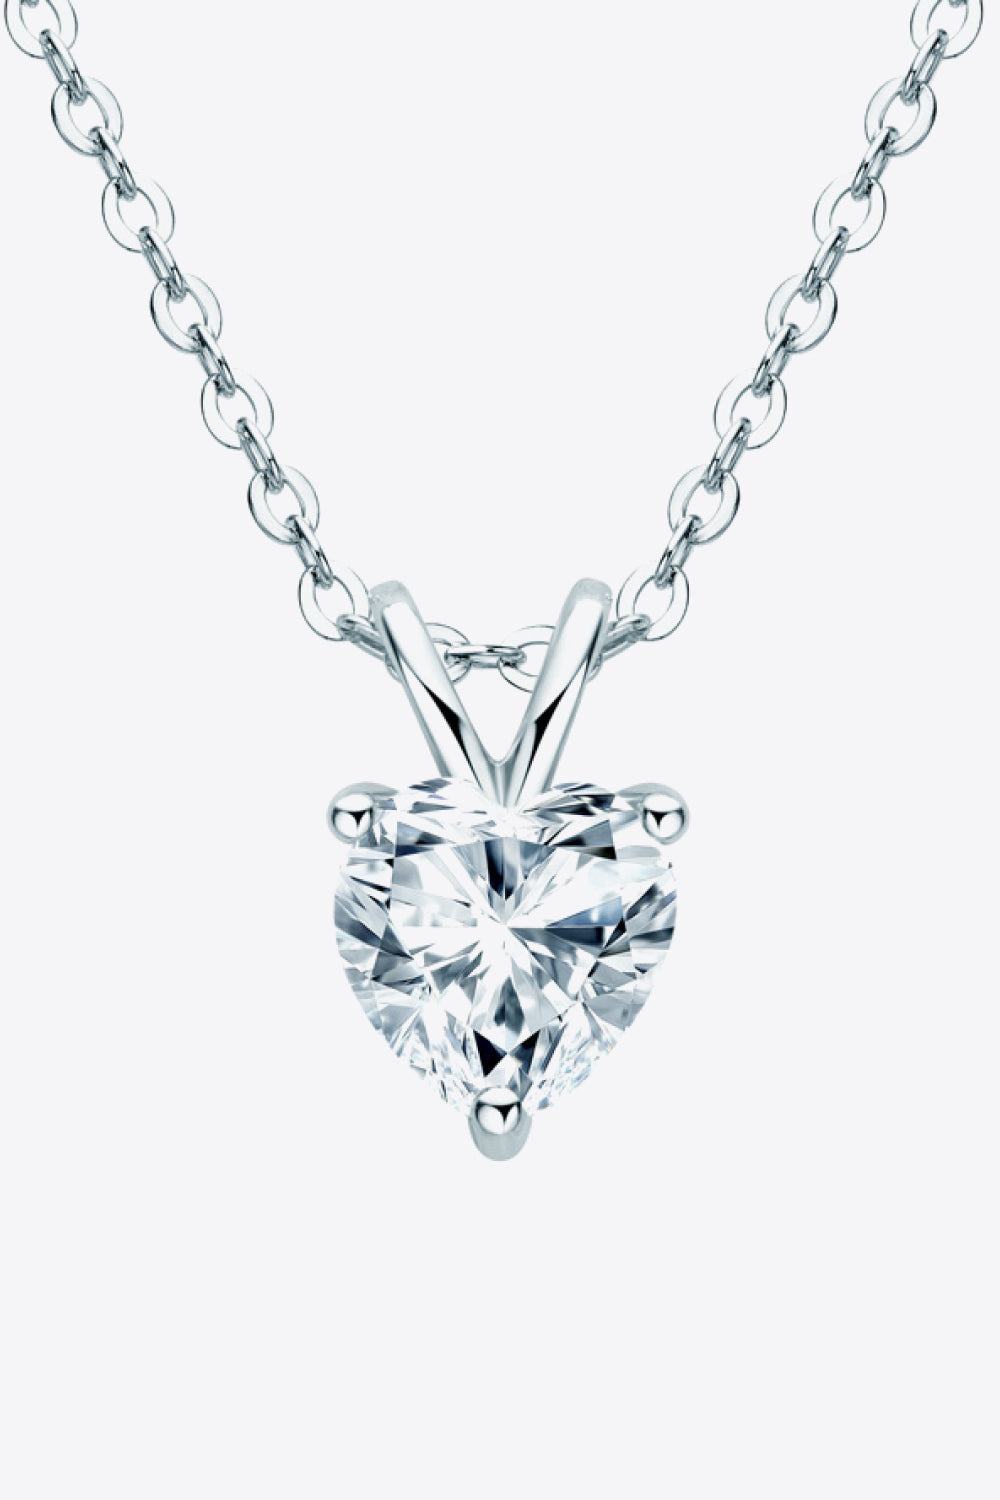 1 Carat 925 Sterling Silver or Platinum Plated Gold - Moissanite Heart-Shaped Pendant Necklace Ti Amo I love you